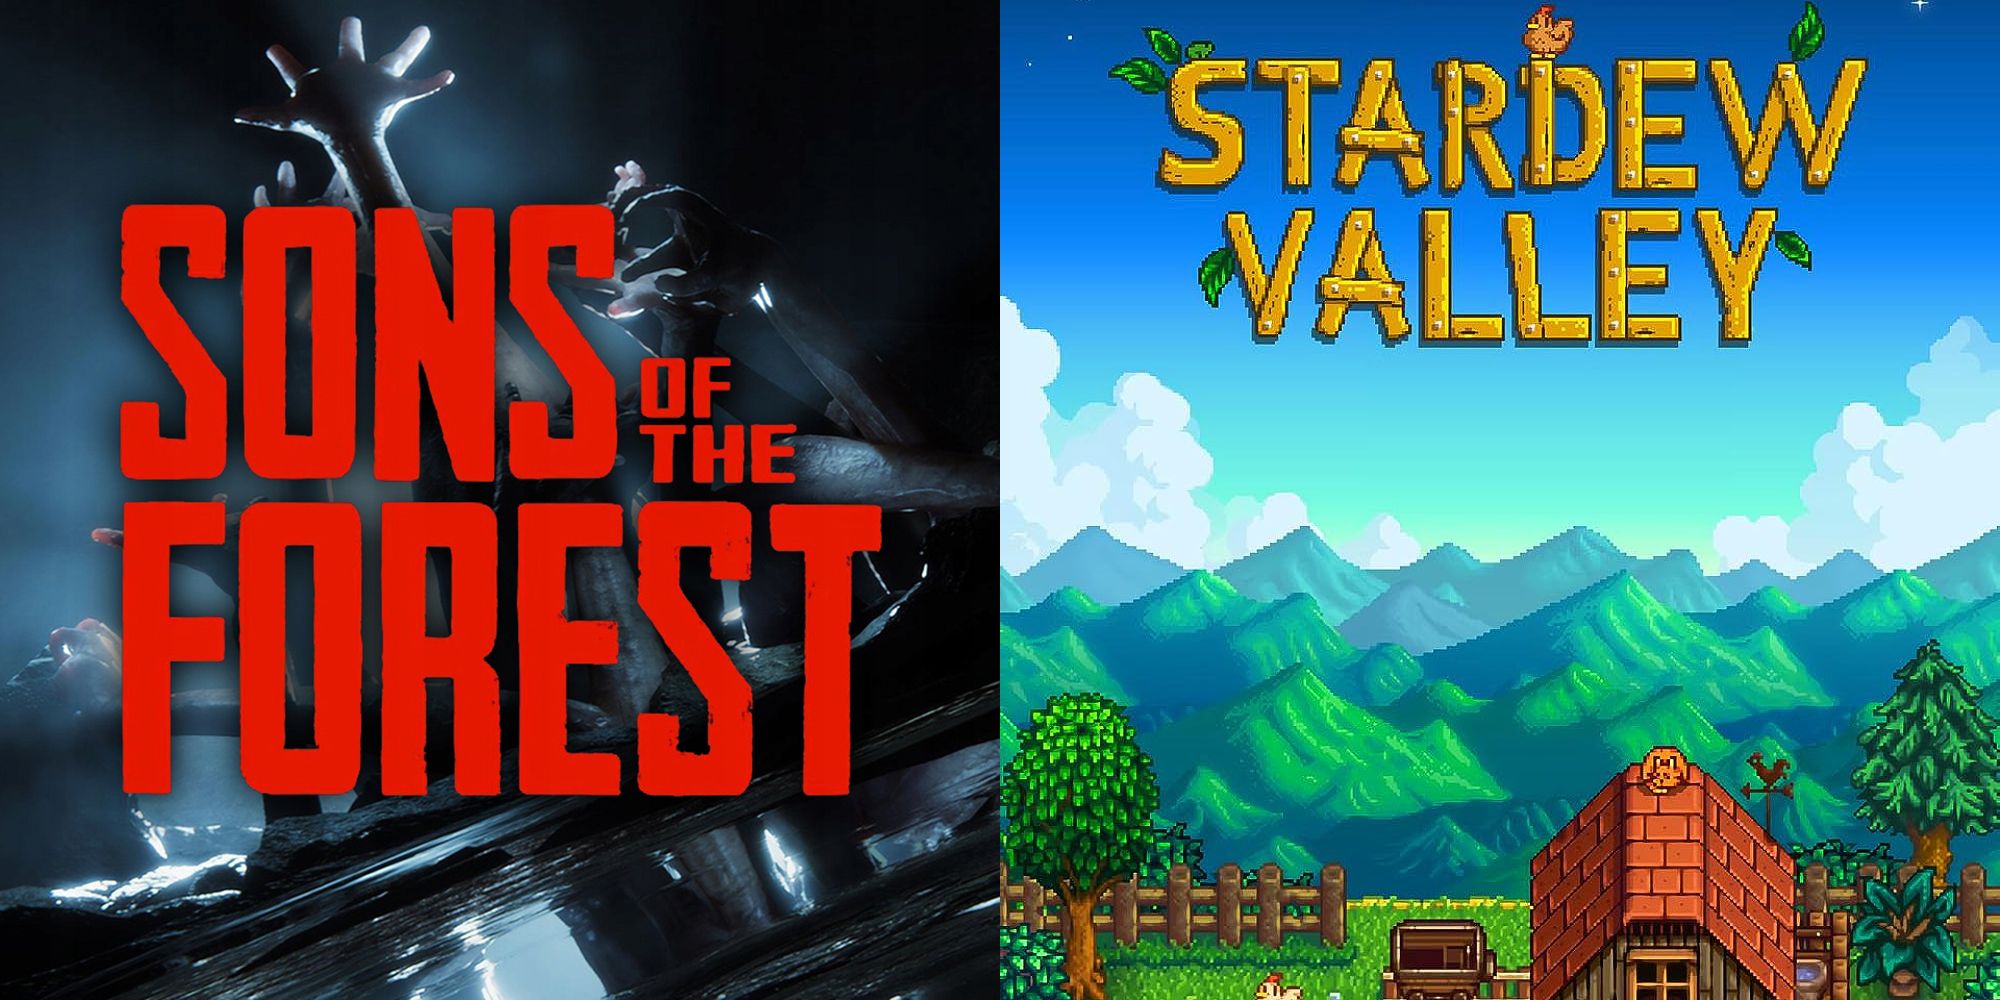 sons of the forest and stardew valley